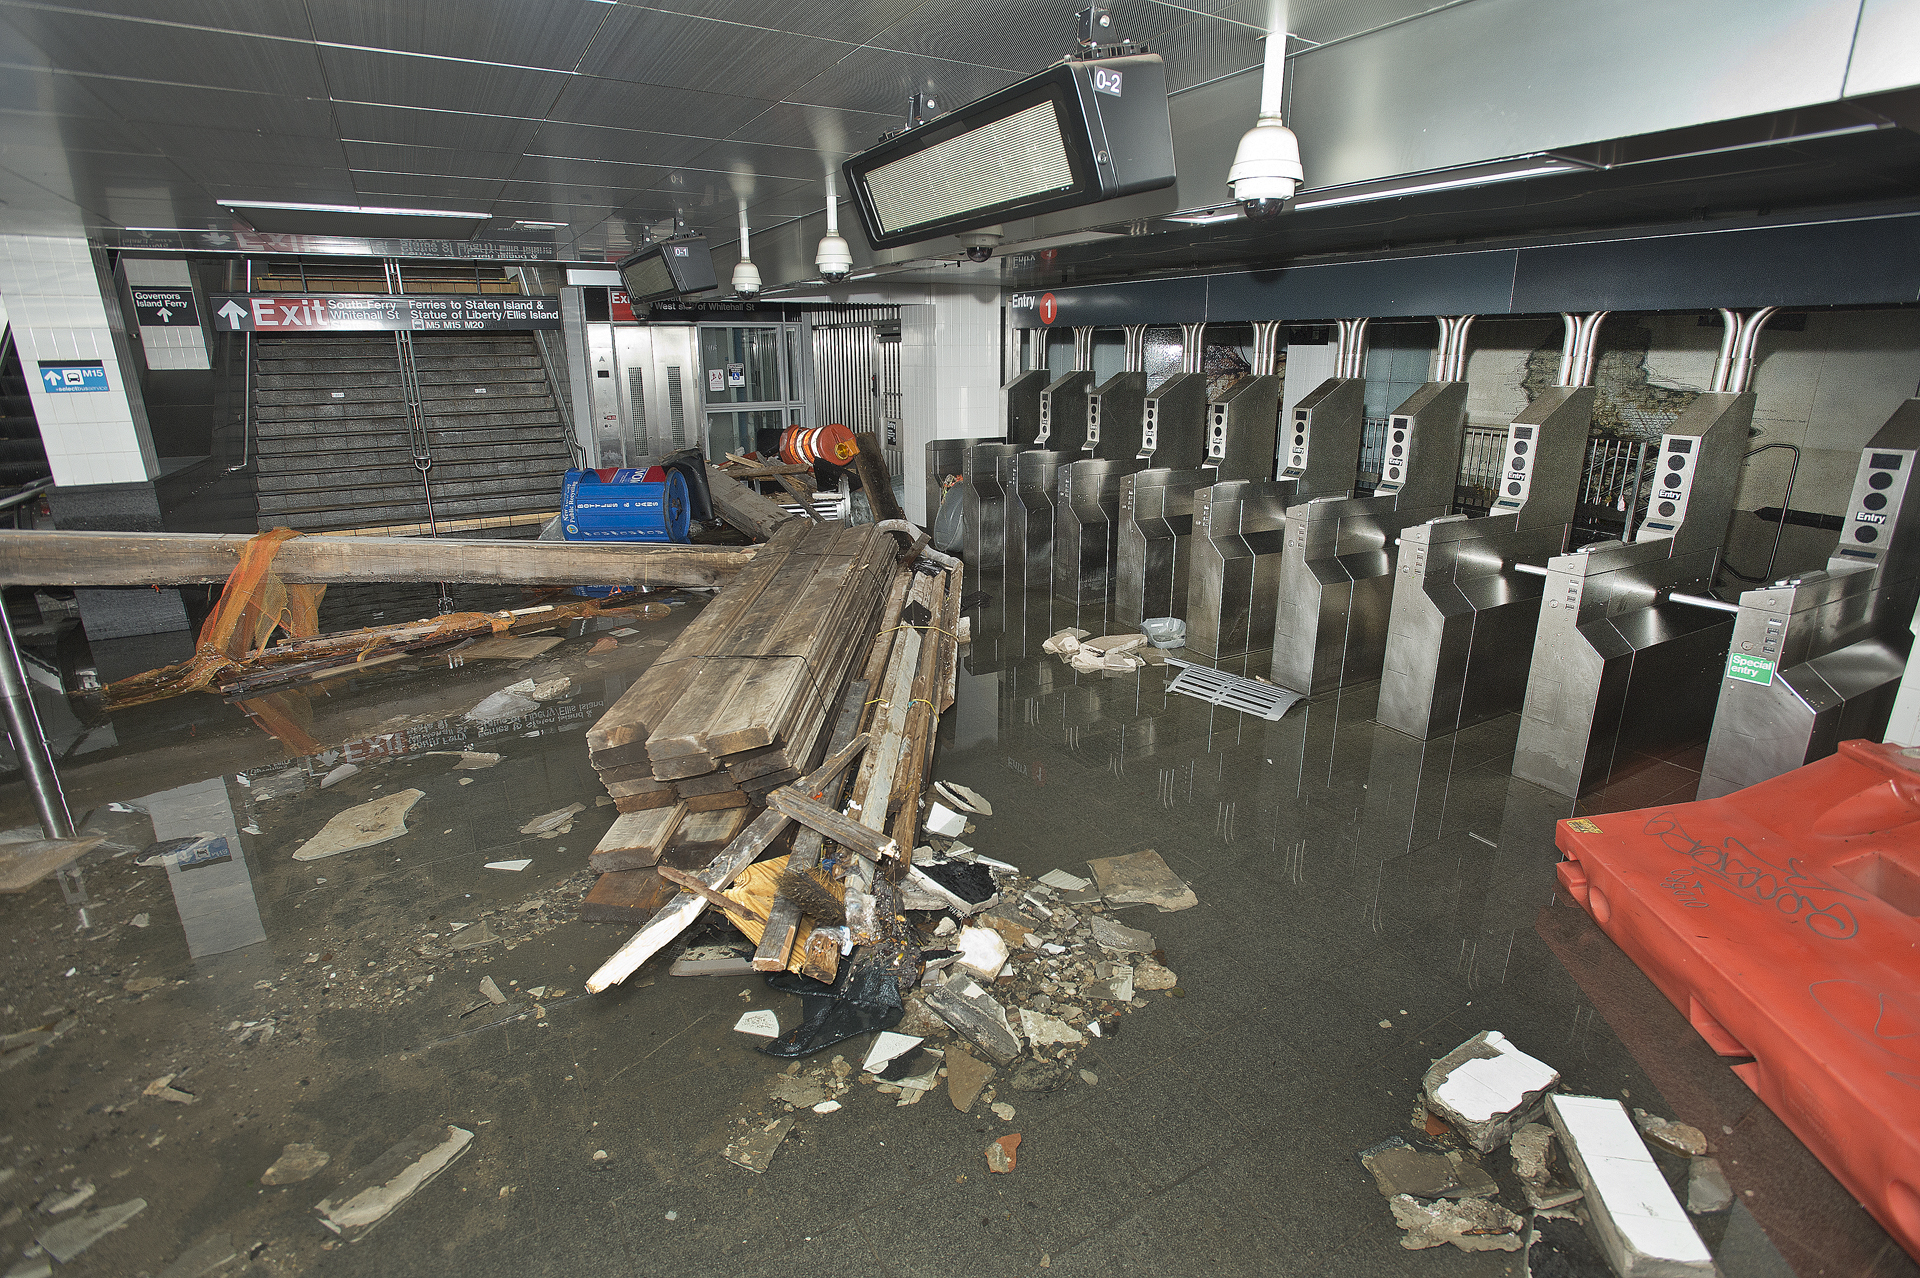 NYC's South Ferry Subway Station flooded after Hurricane Sandy